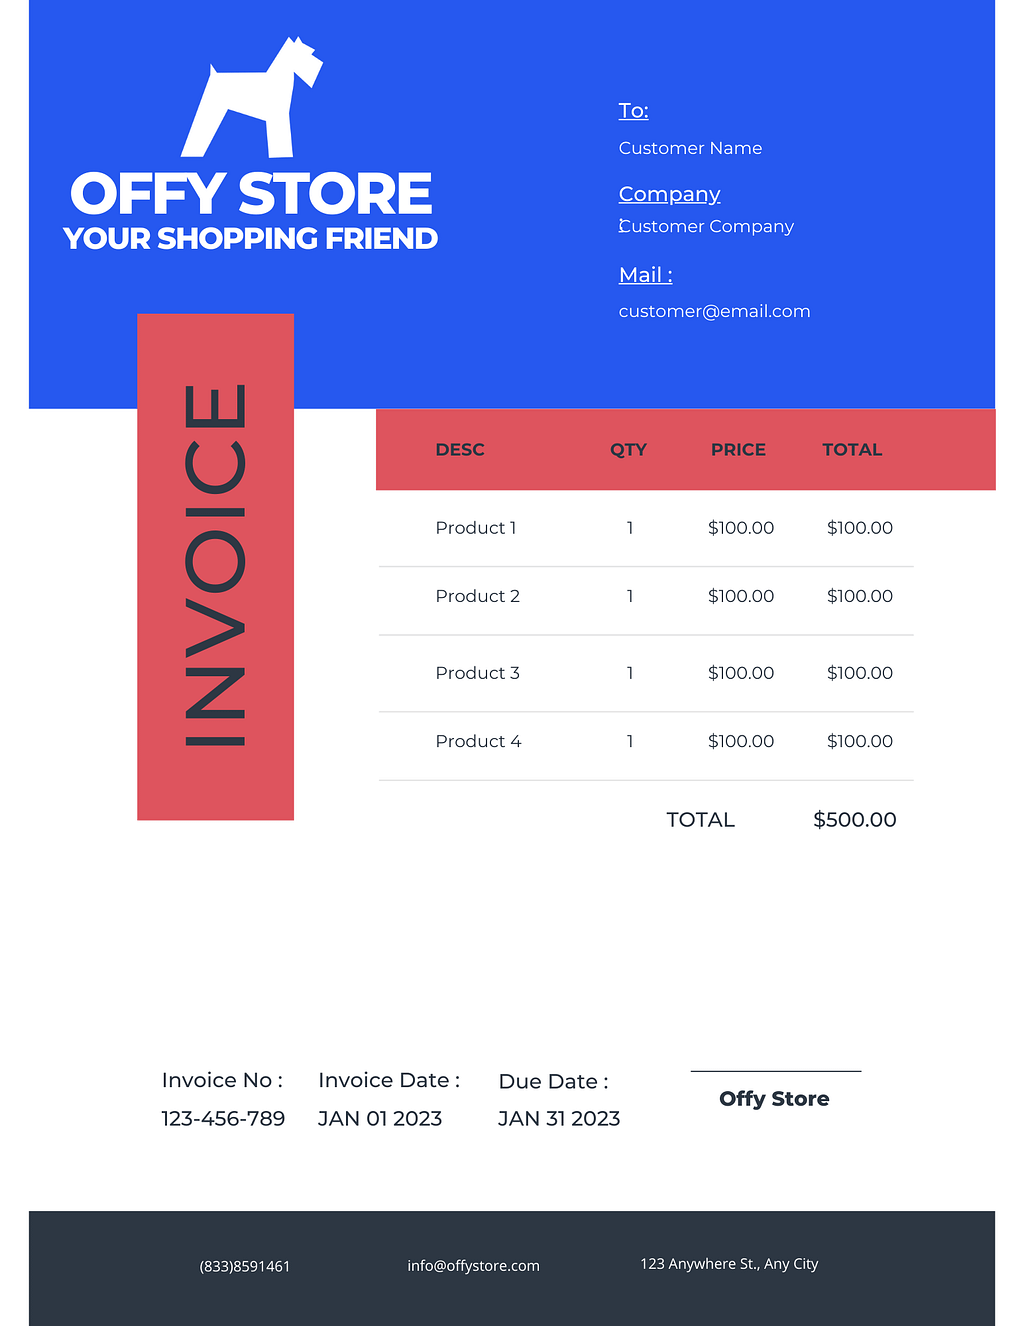 Offy Store Invoice with Net 30 Terms